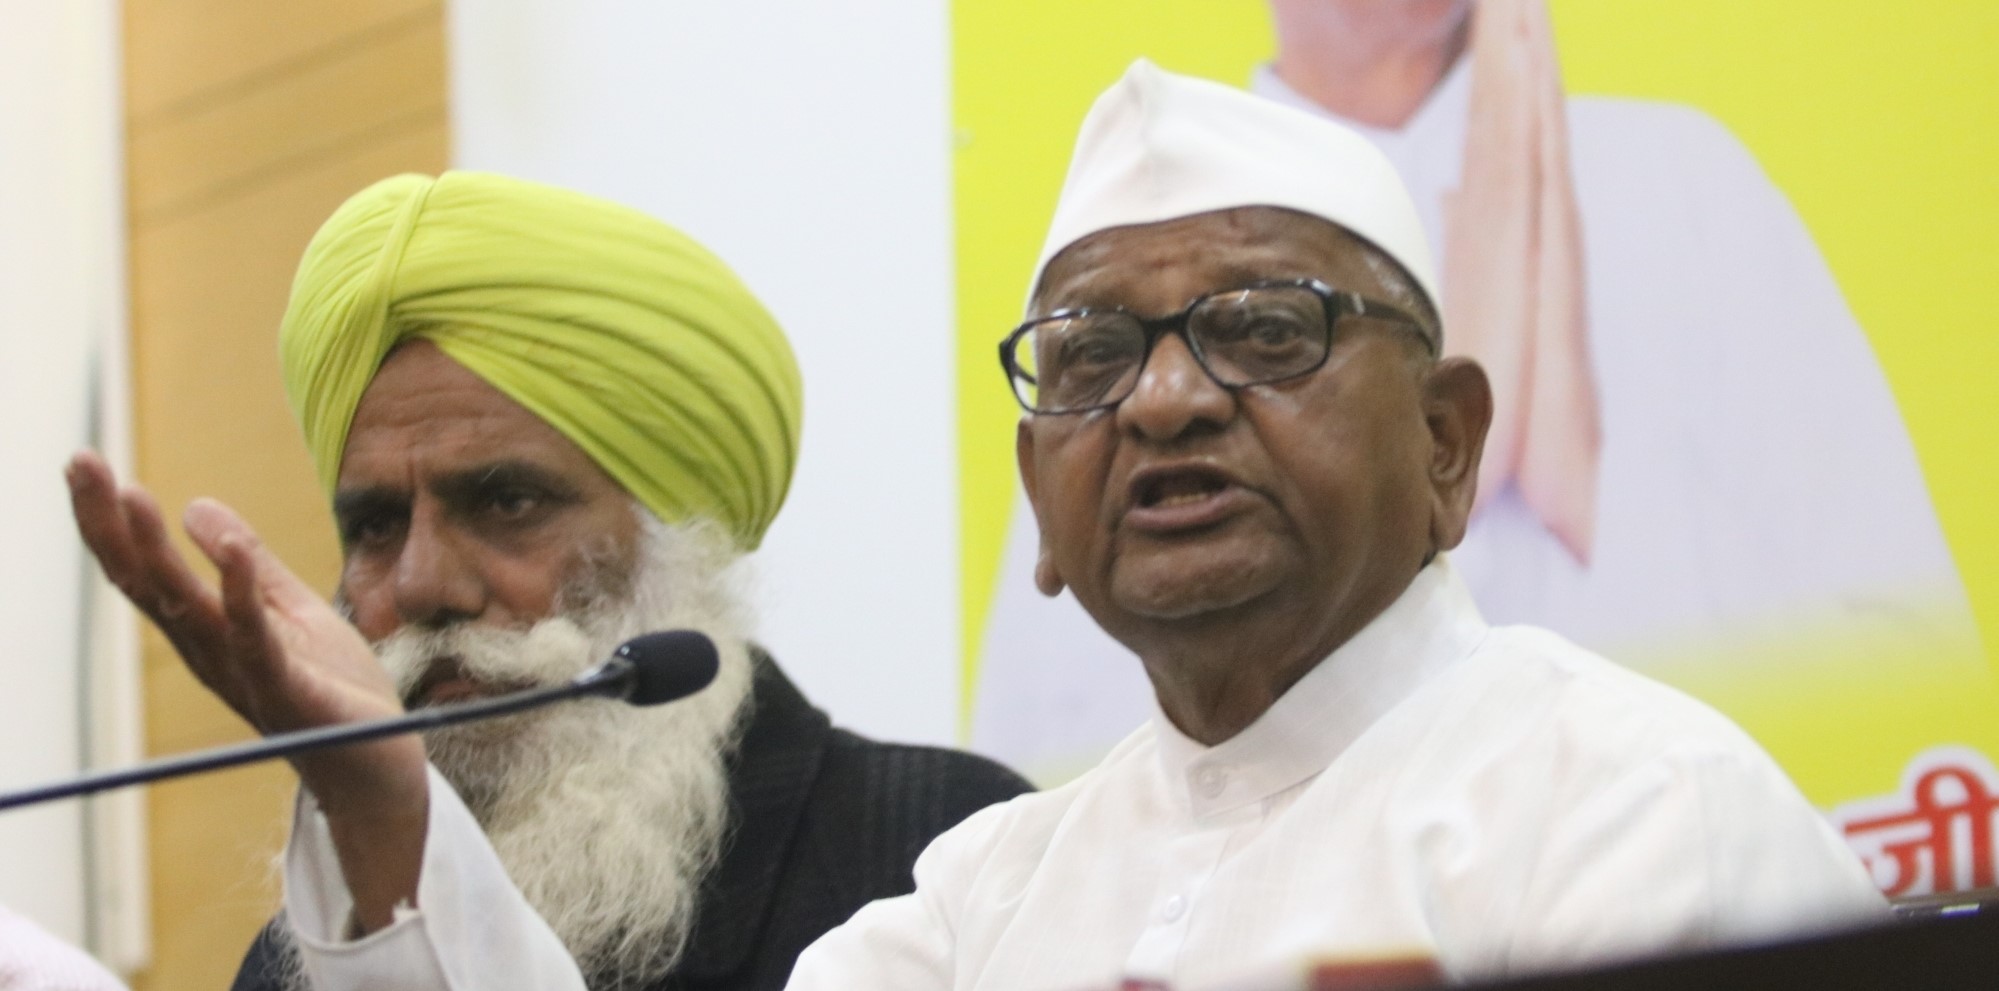 Hunger strike: Hazare's BP, blood sugar levels "significantly" high